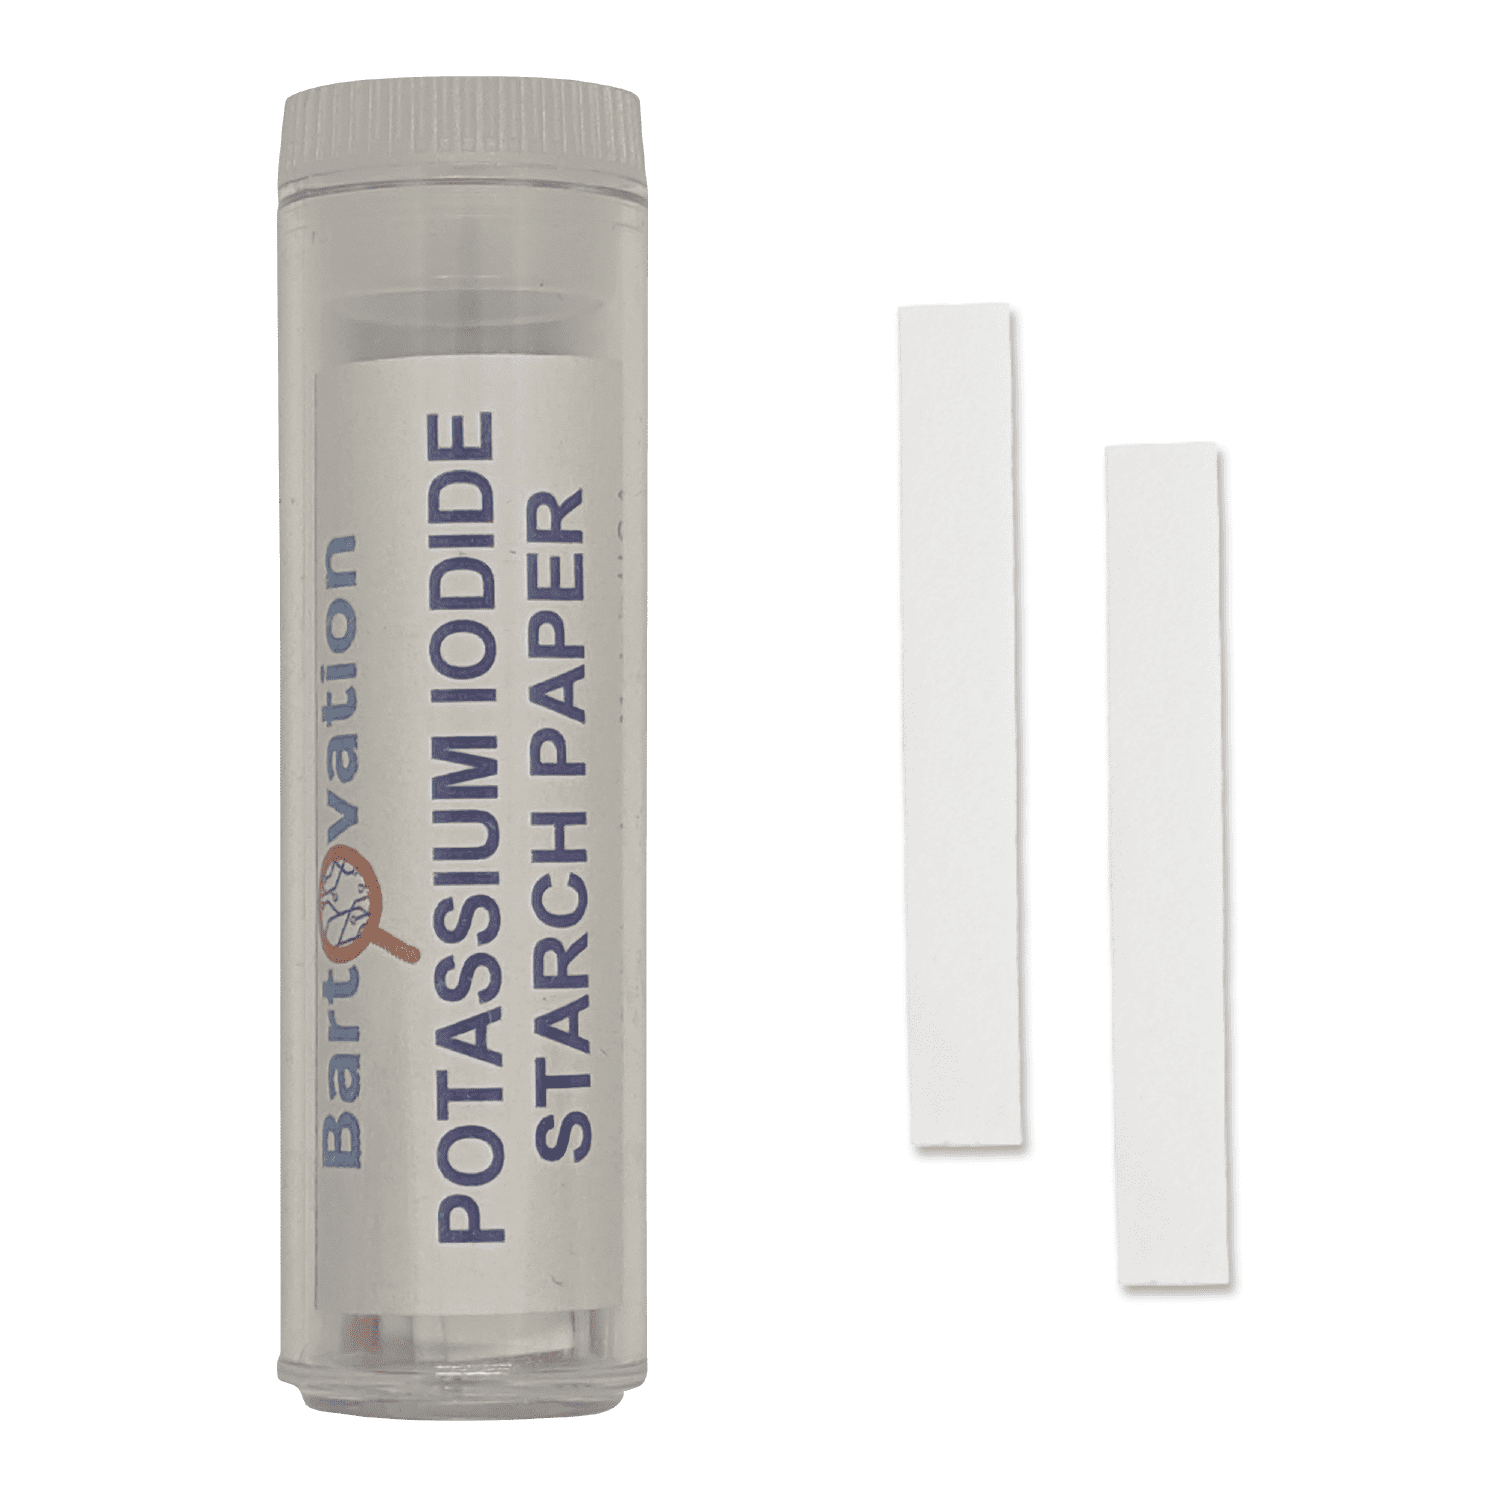  Memory Cross 12,000 Perfume Test Strips Printed with Company  Name and Logo Printed in Full Color - Premium Fragrance Test Strips for  Essential Oil and Scents : Health & Household